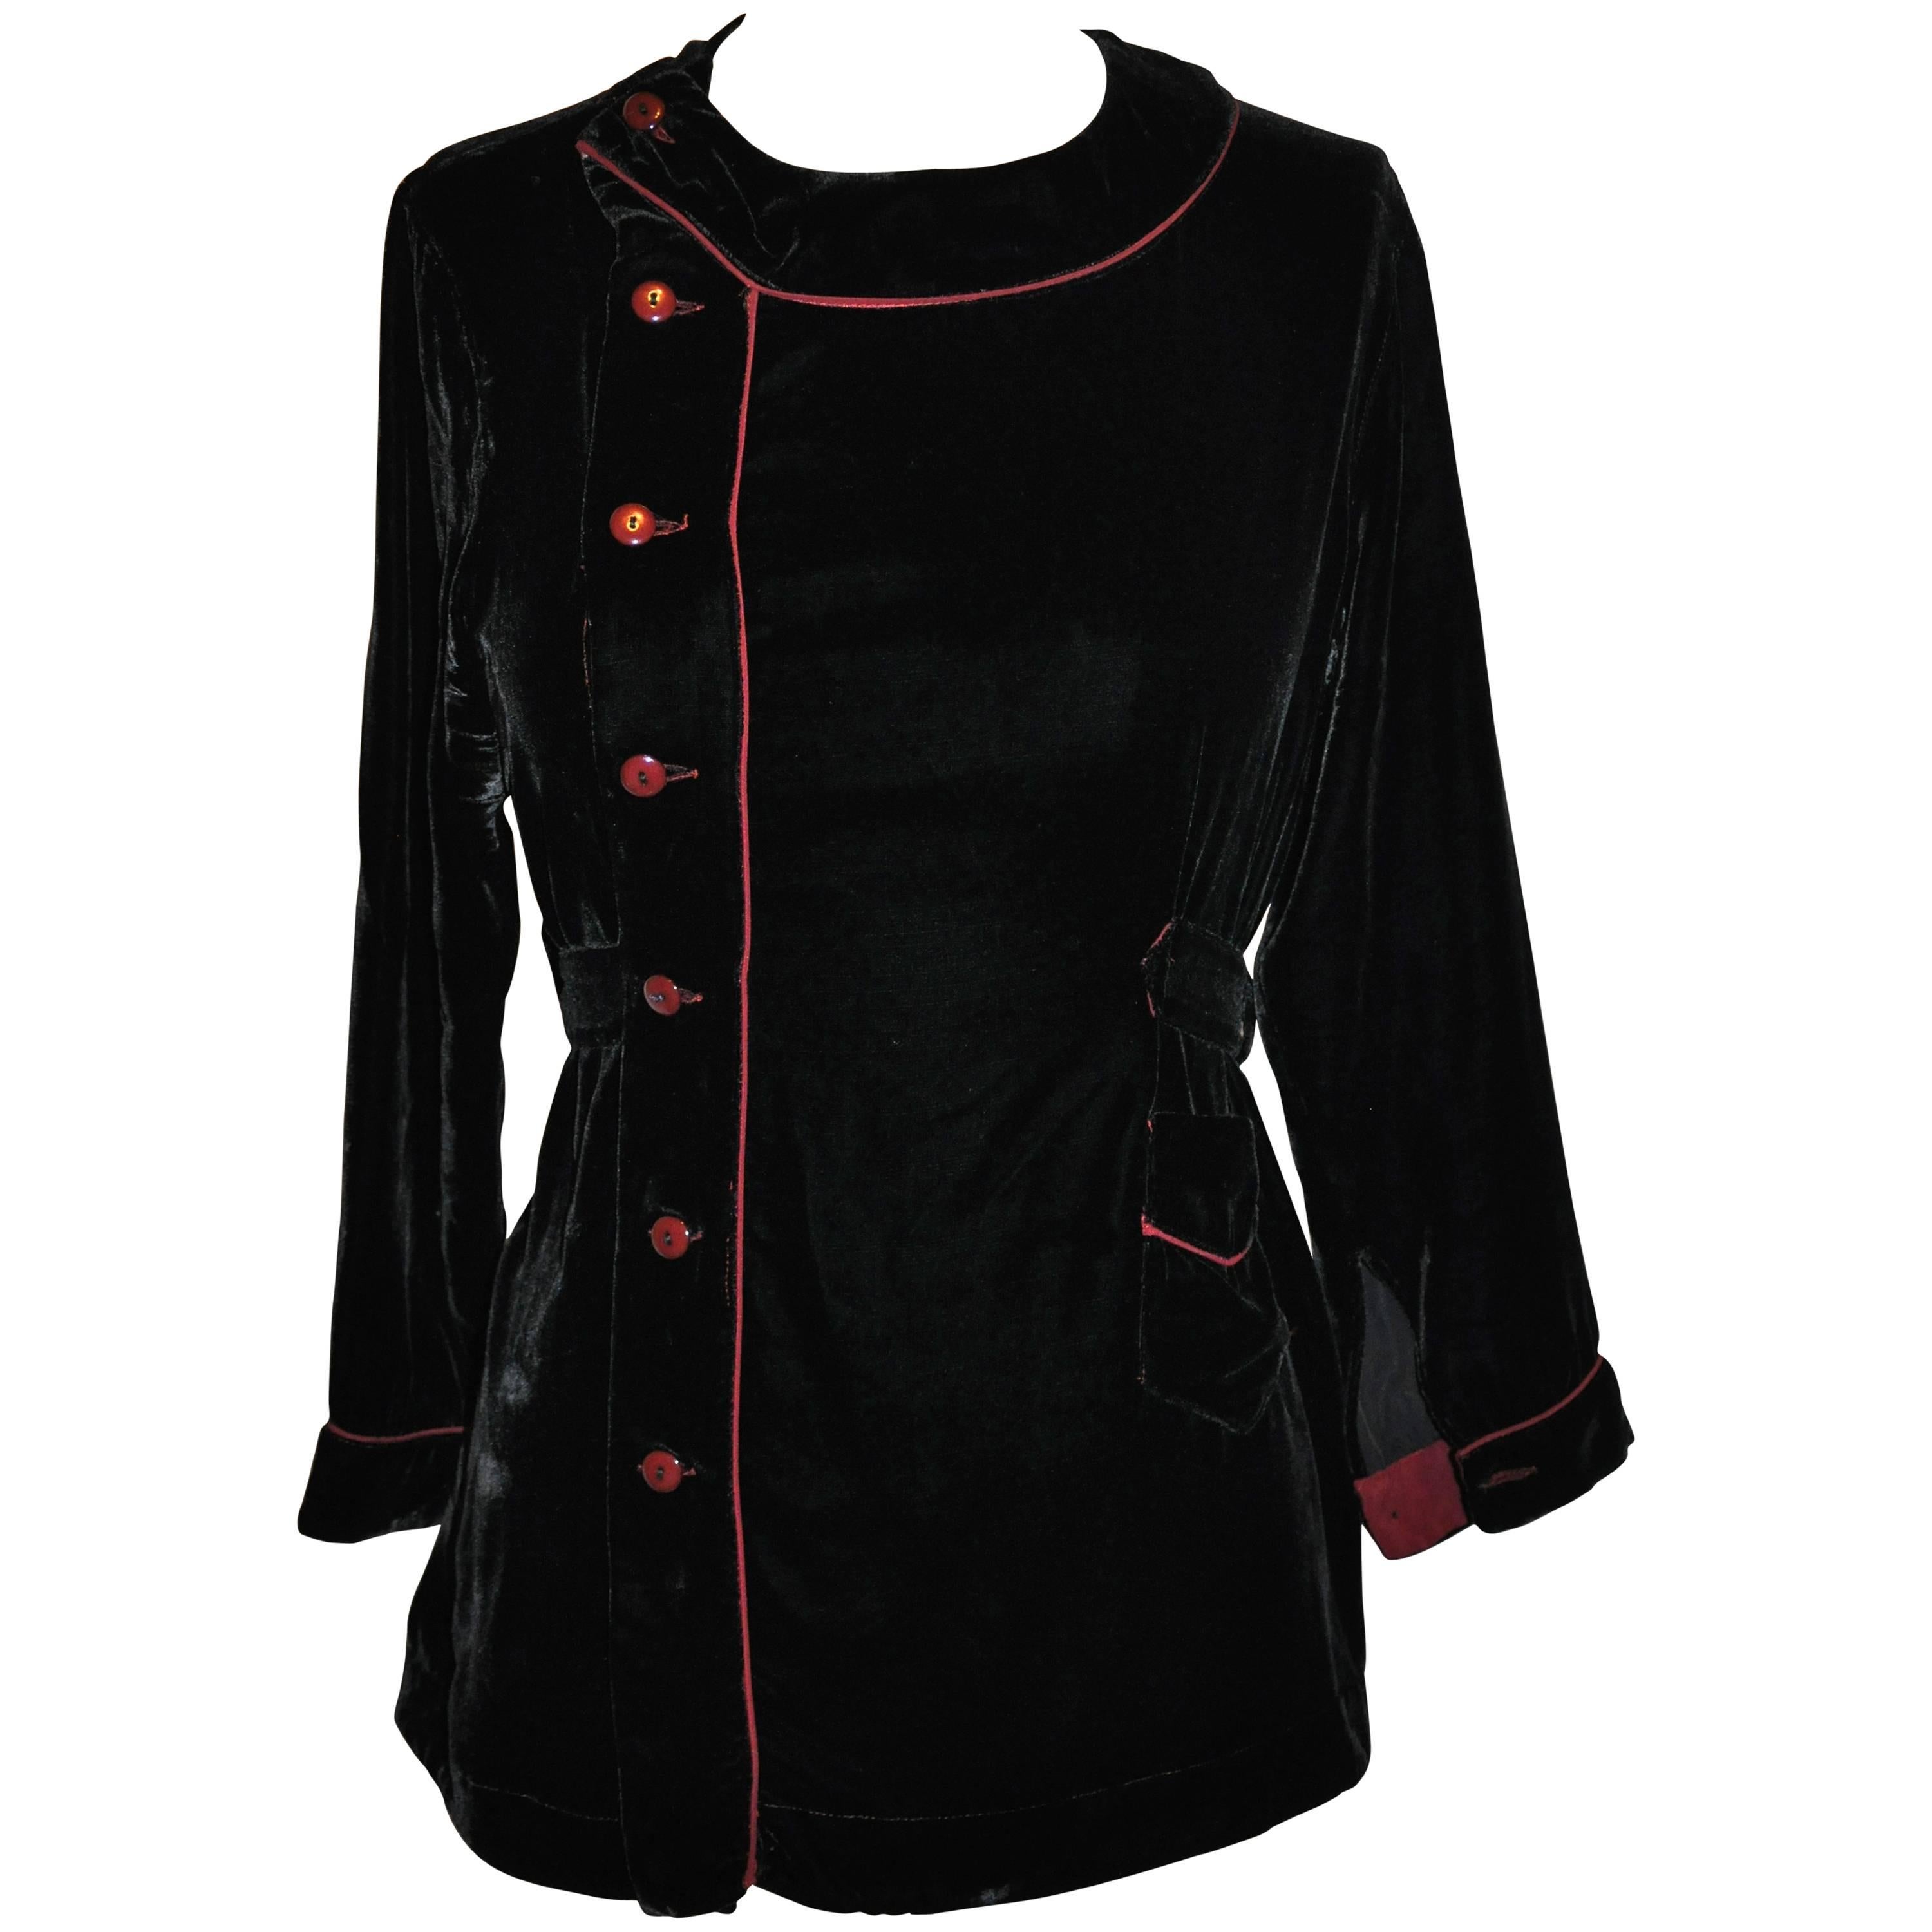 Jean Paul Gaultier Black Velvet with Piping Button Top